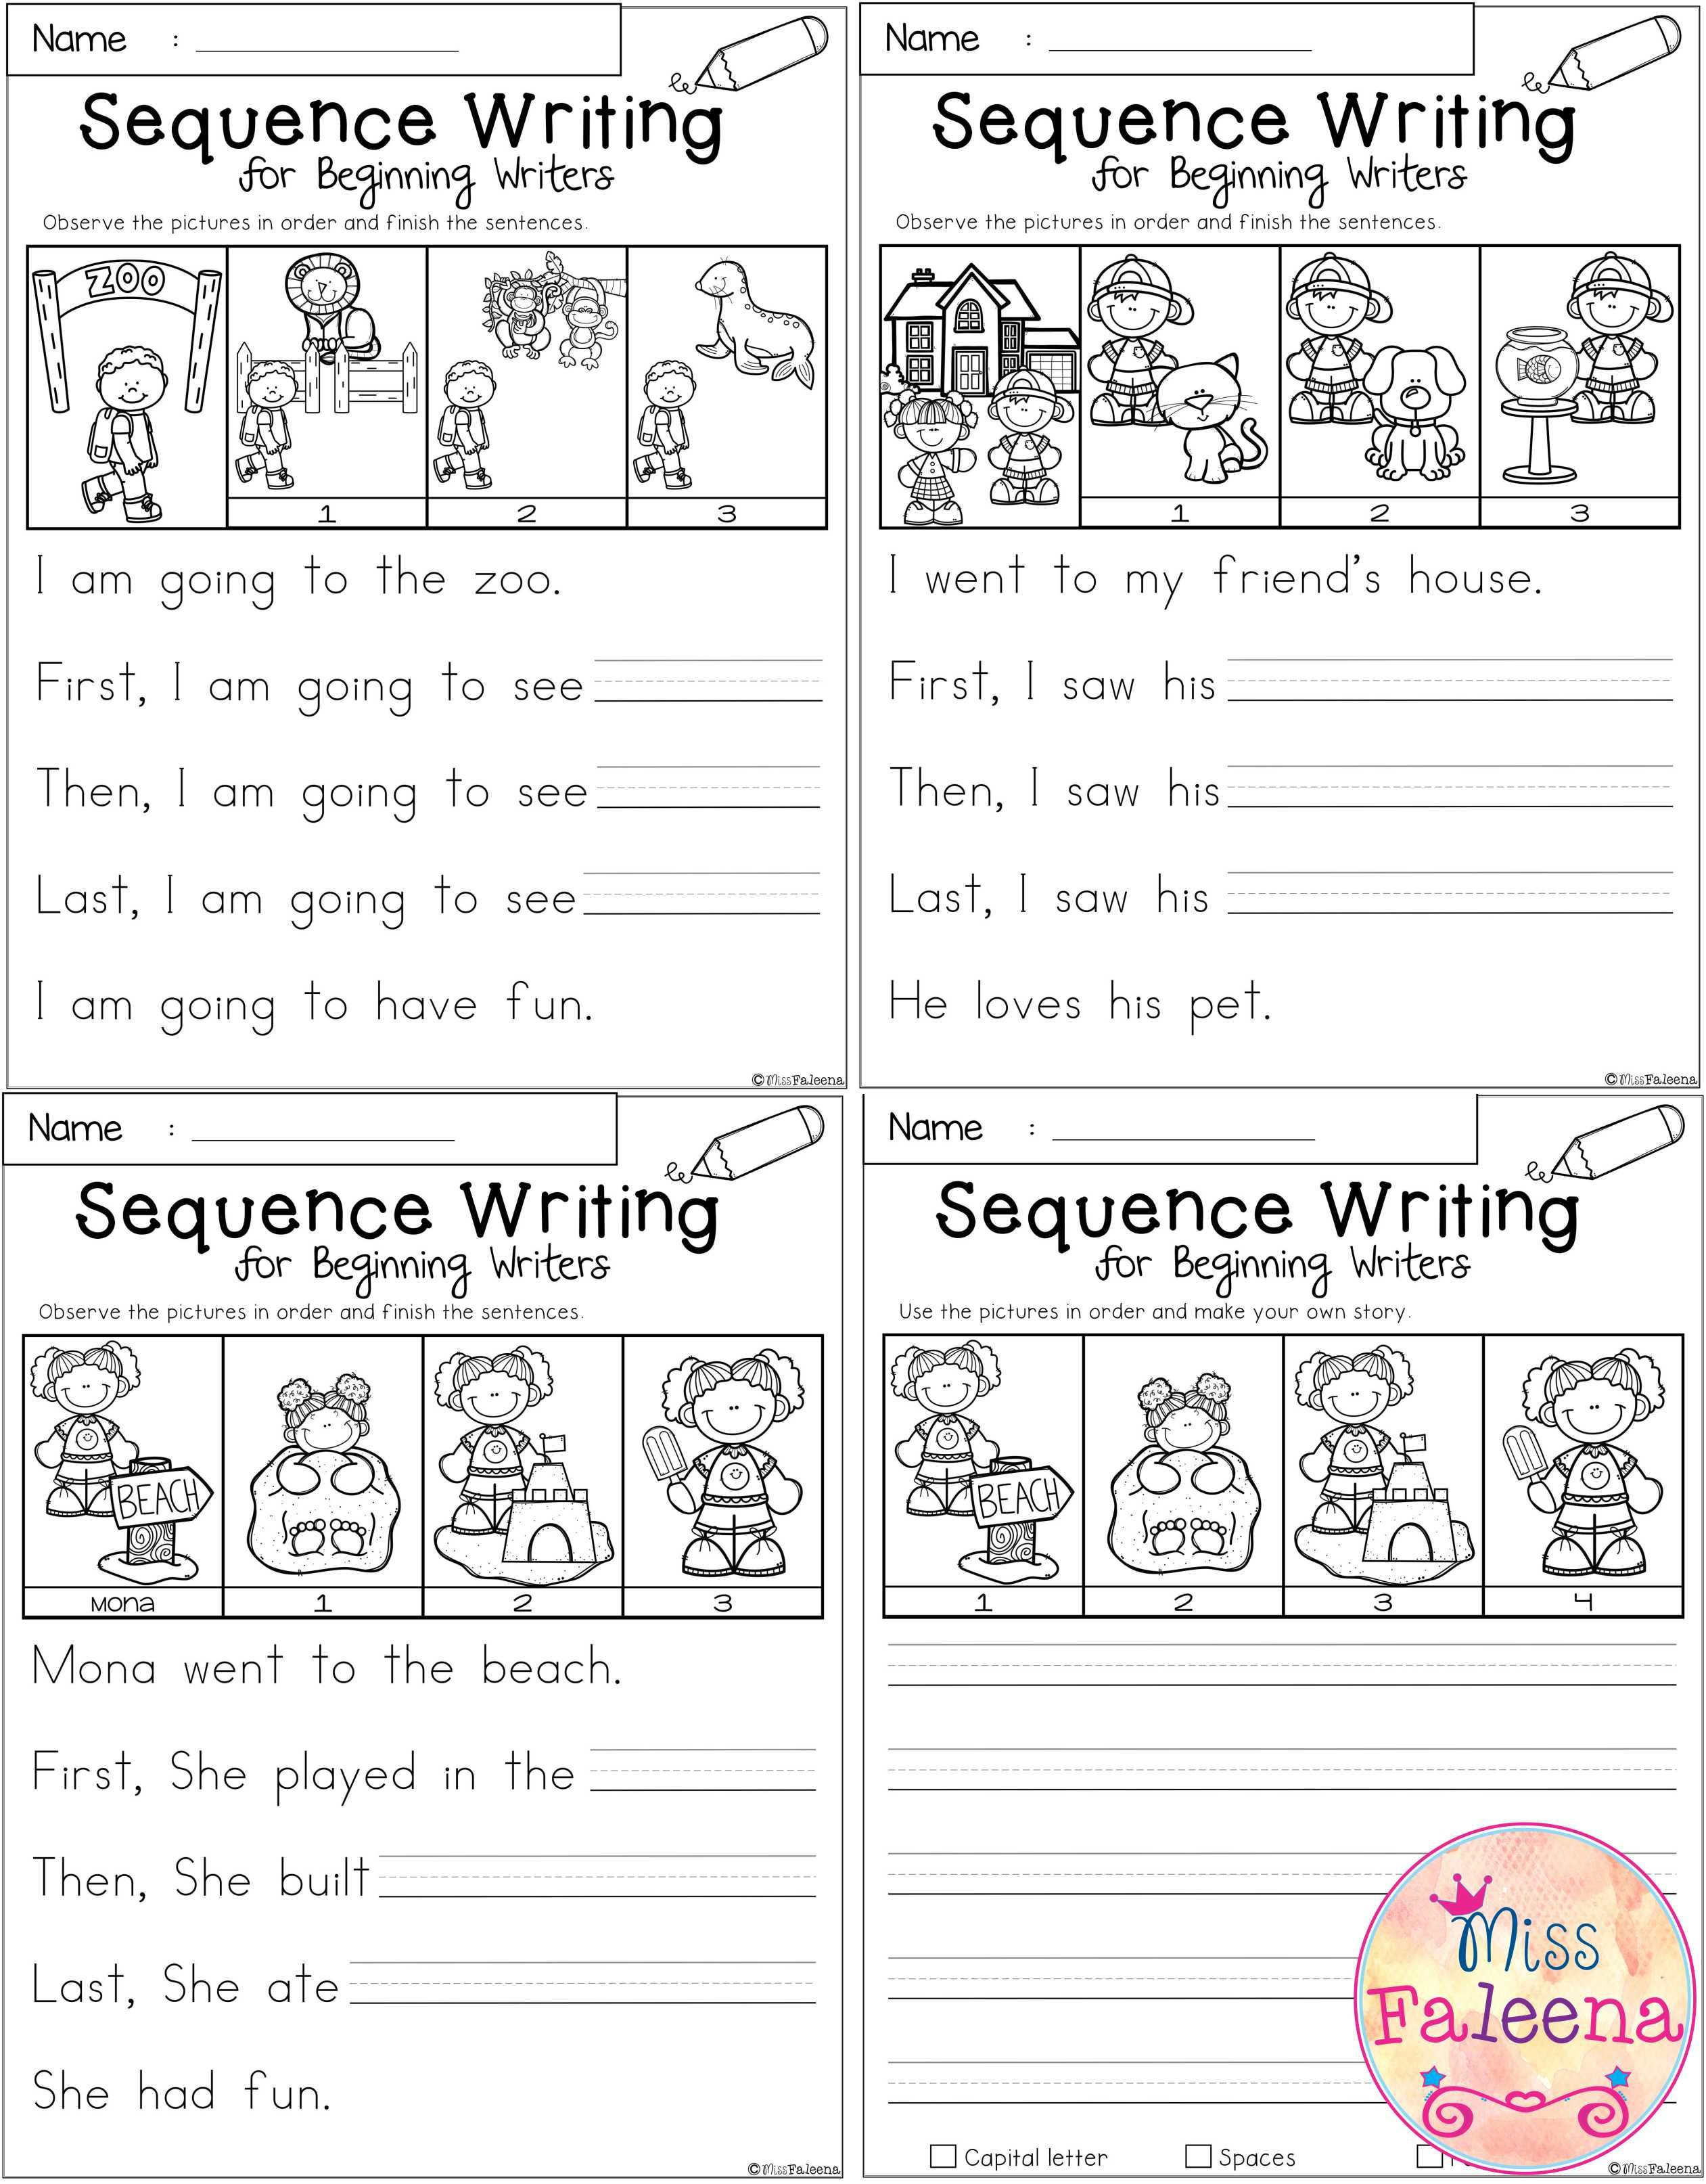 Sequencing Worksheet First Grade Free Sequence Writing for Beginning Writers with Images